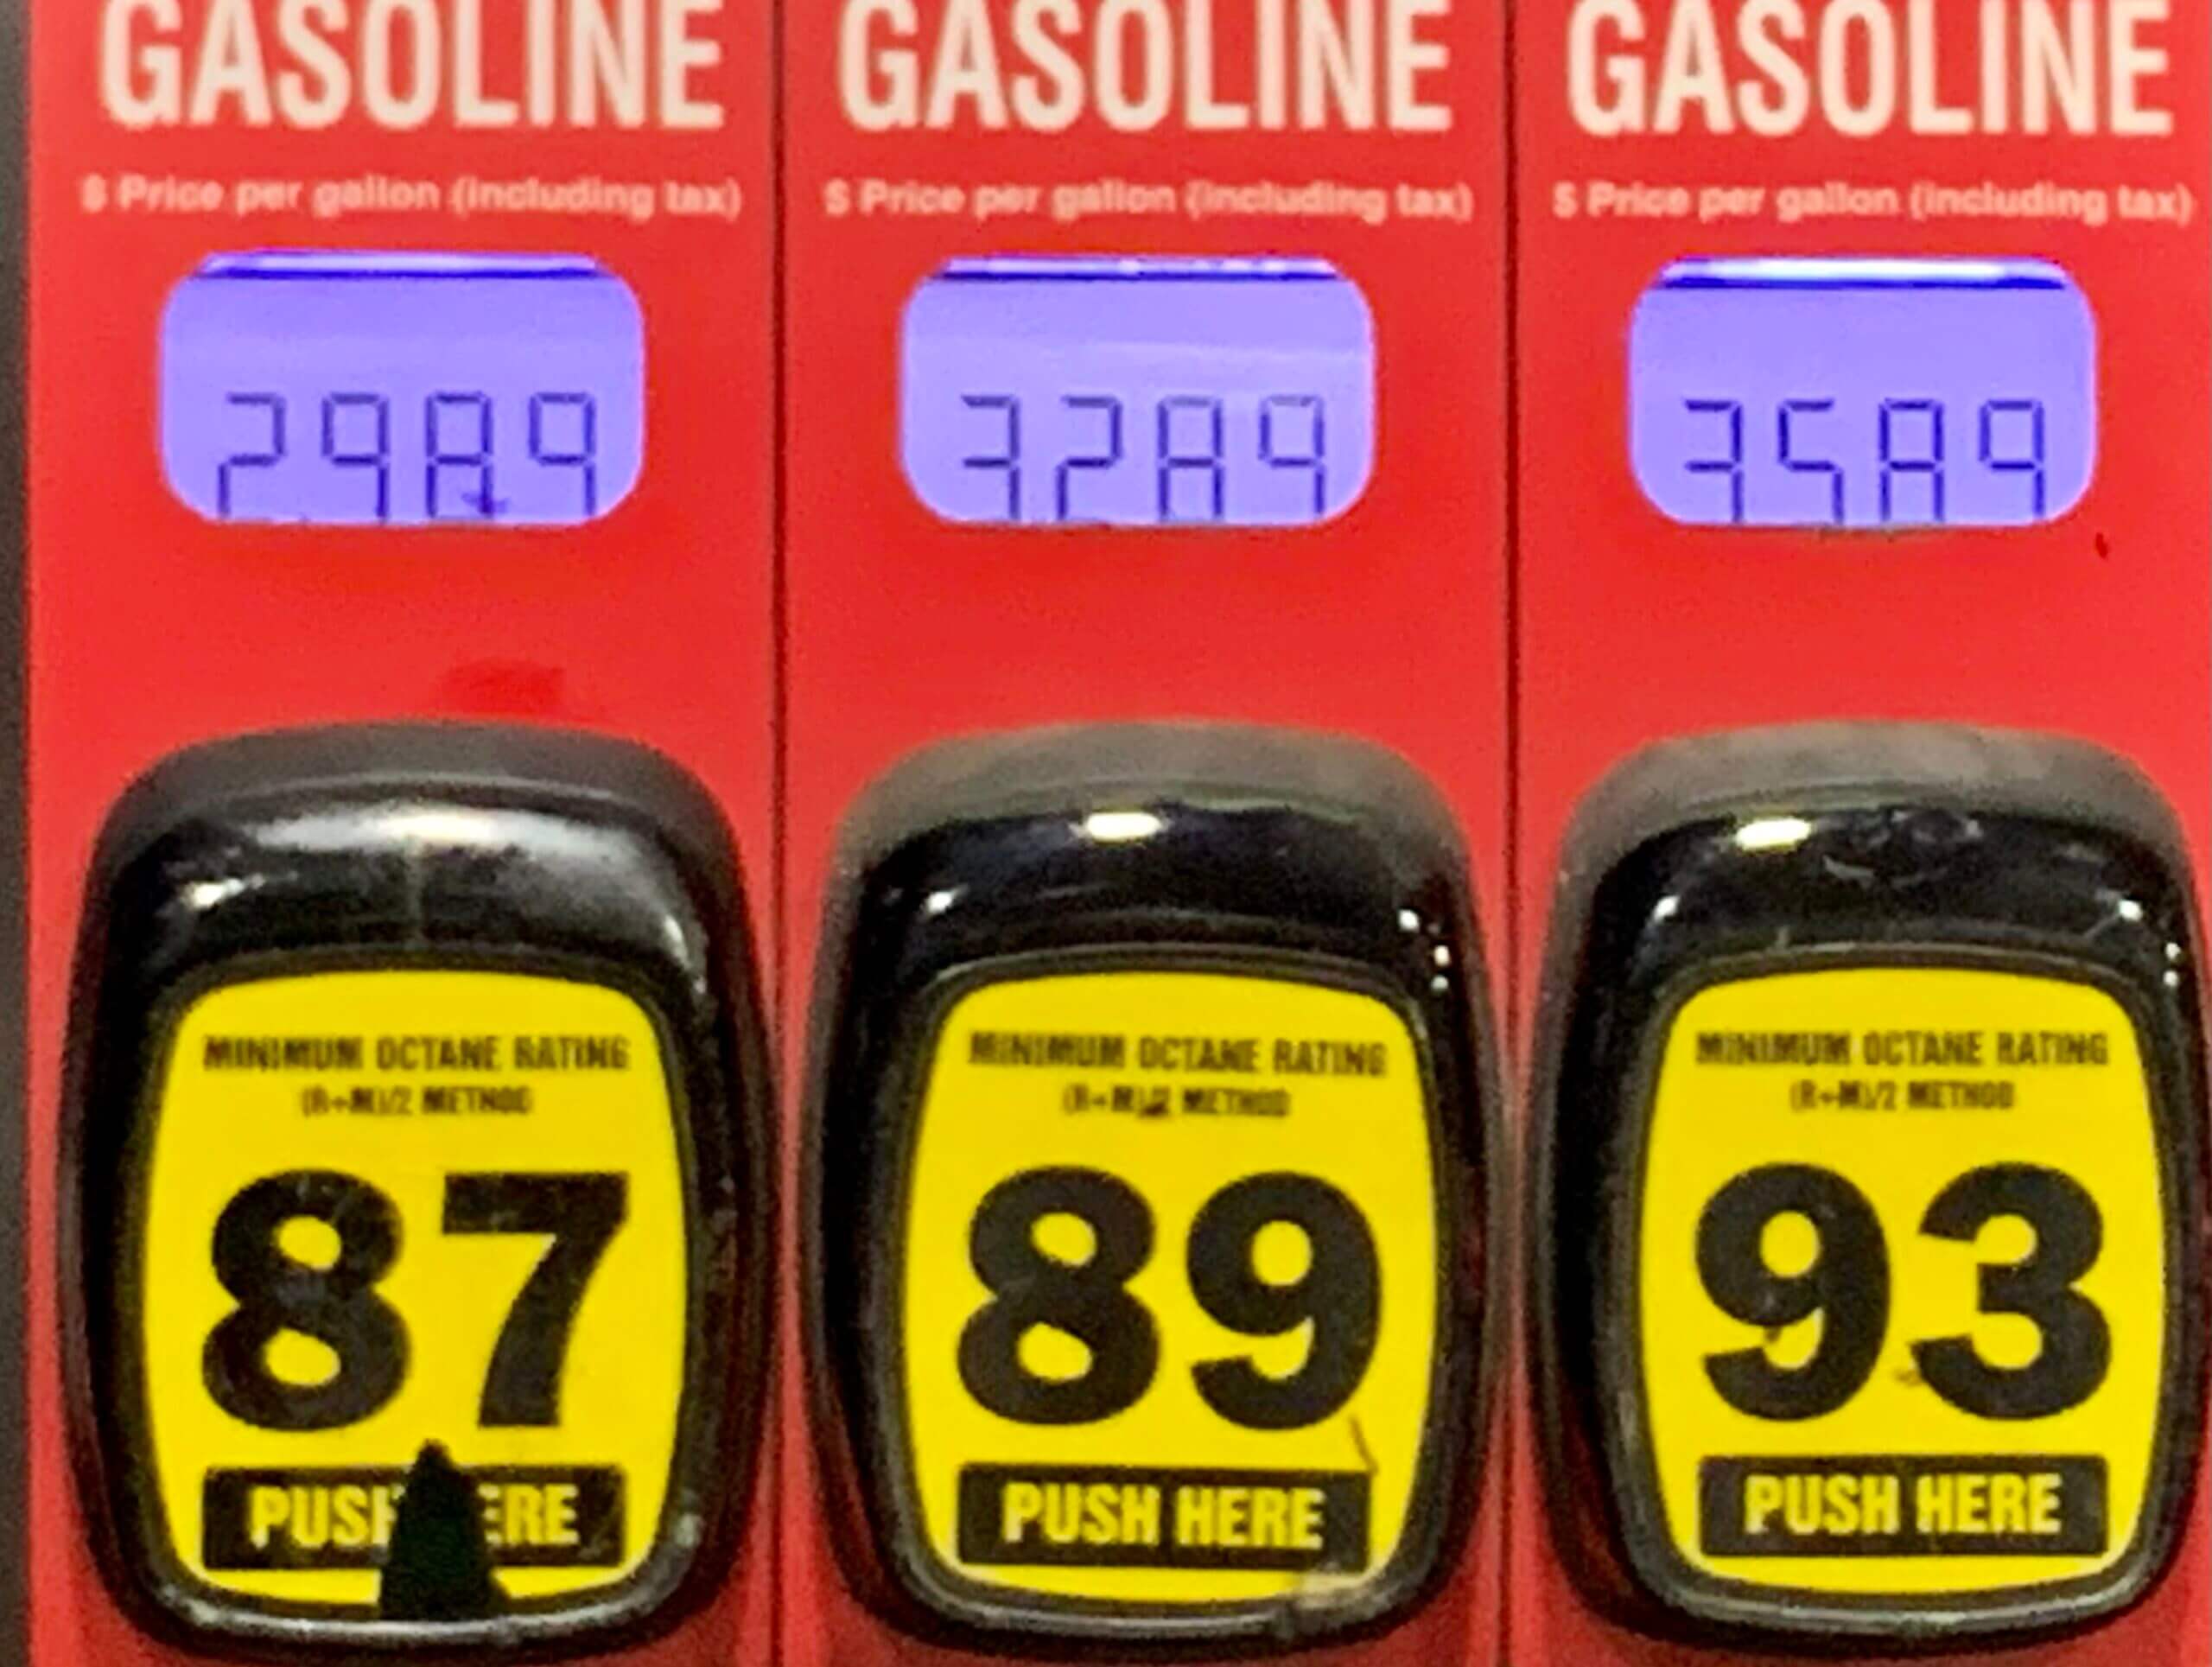 Local, state gas prices inch higher, still lowest in nation